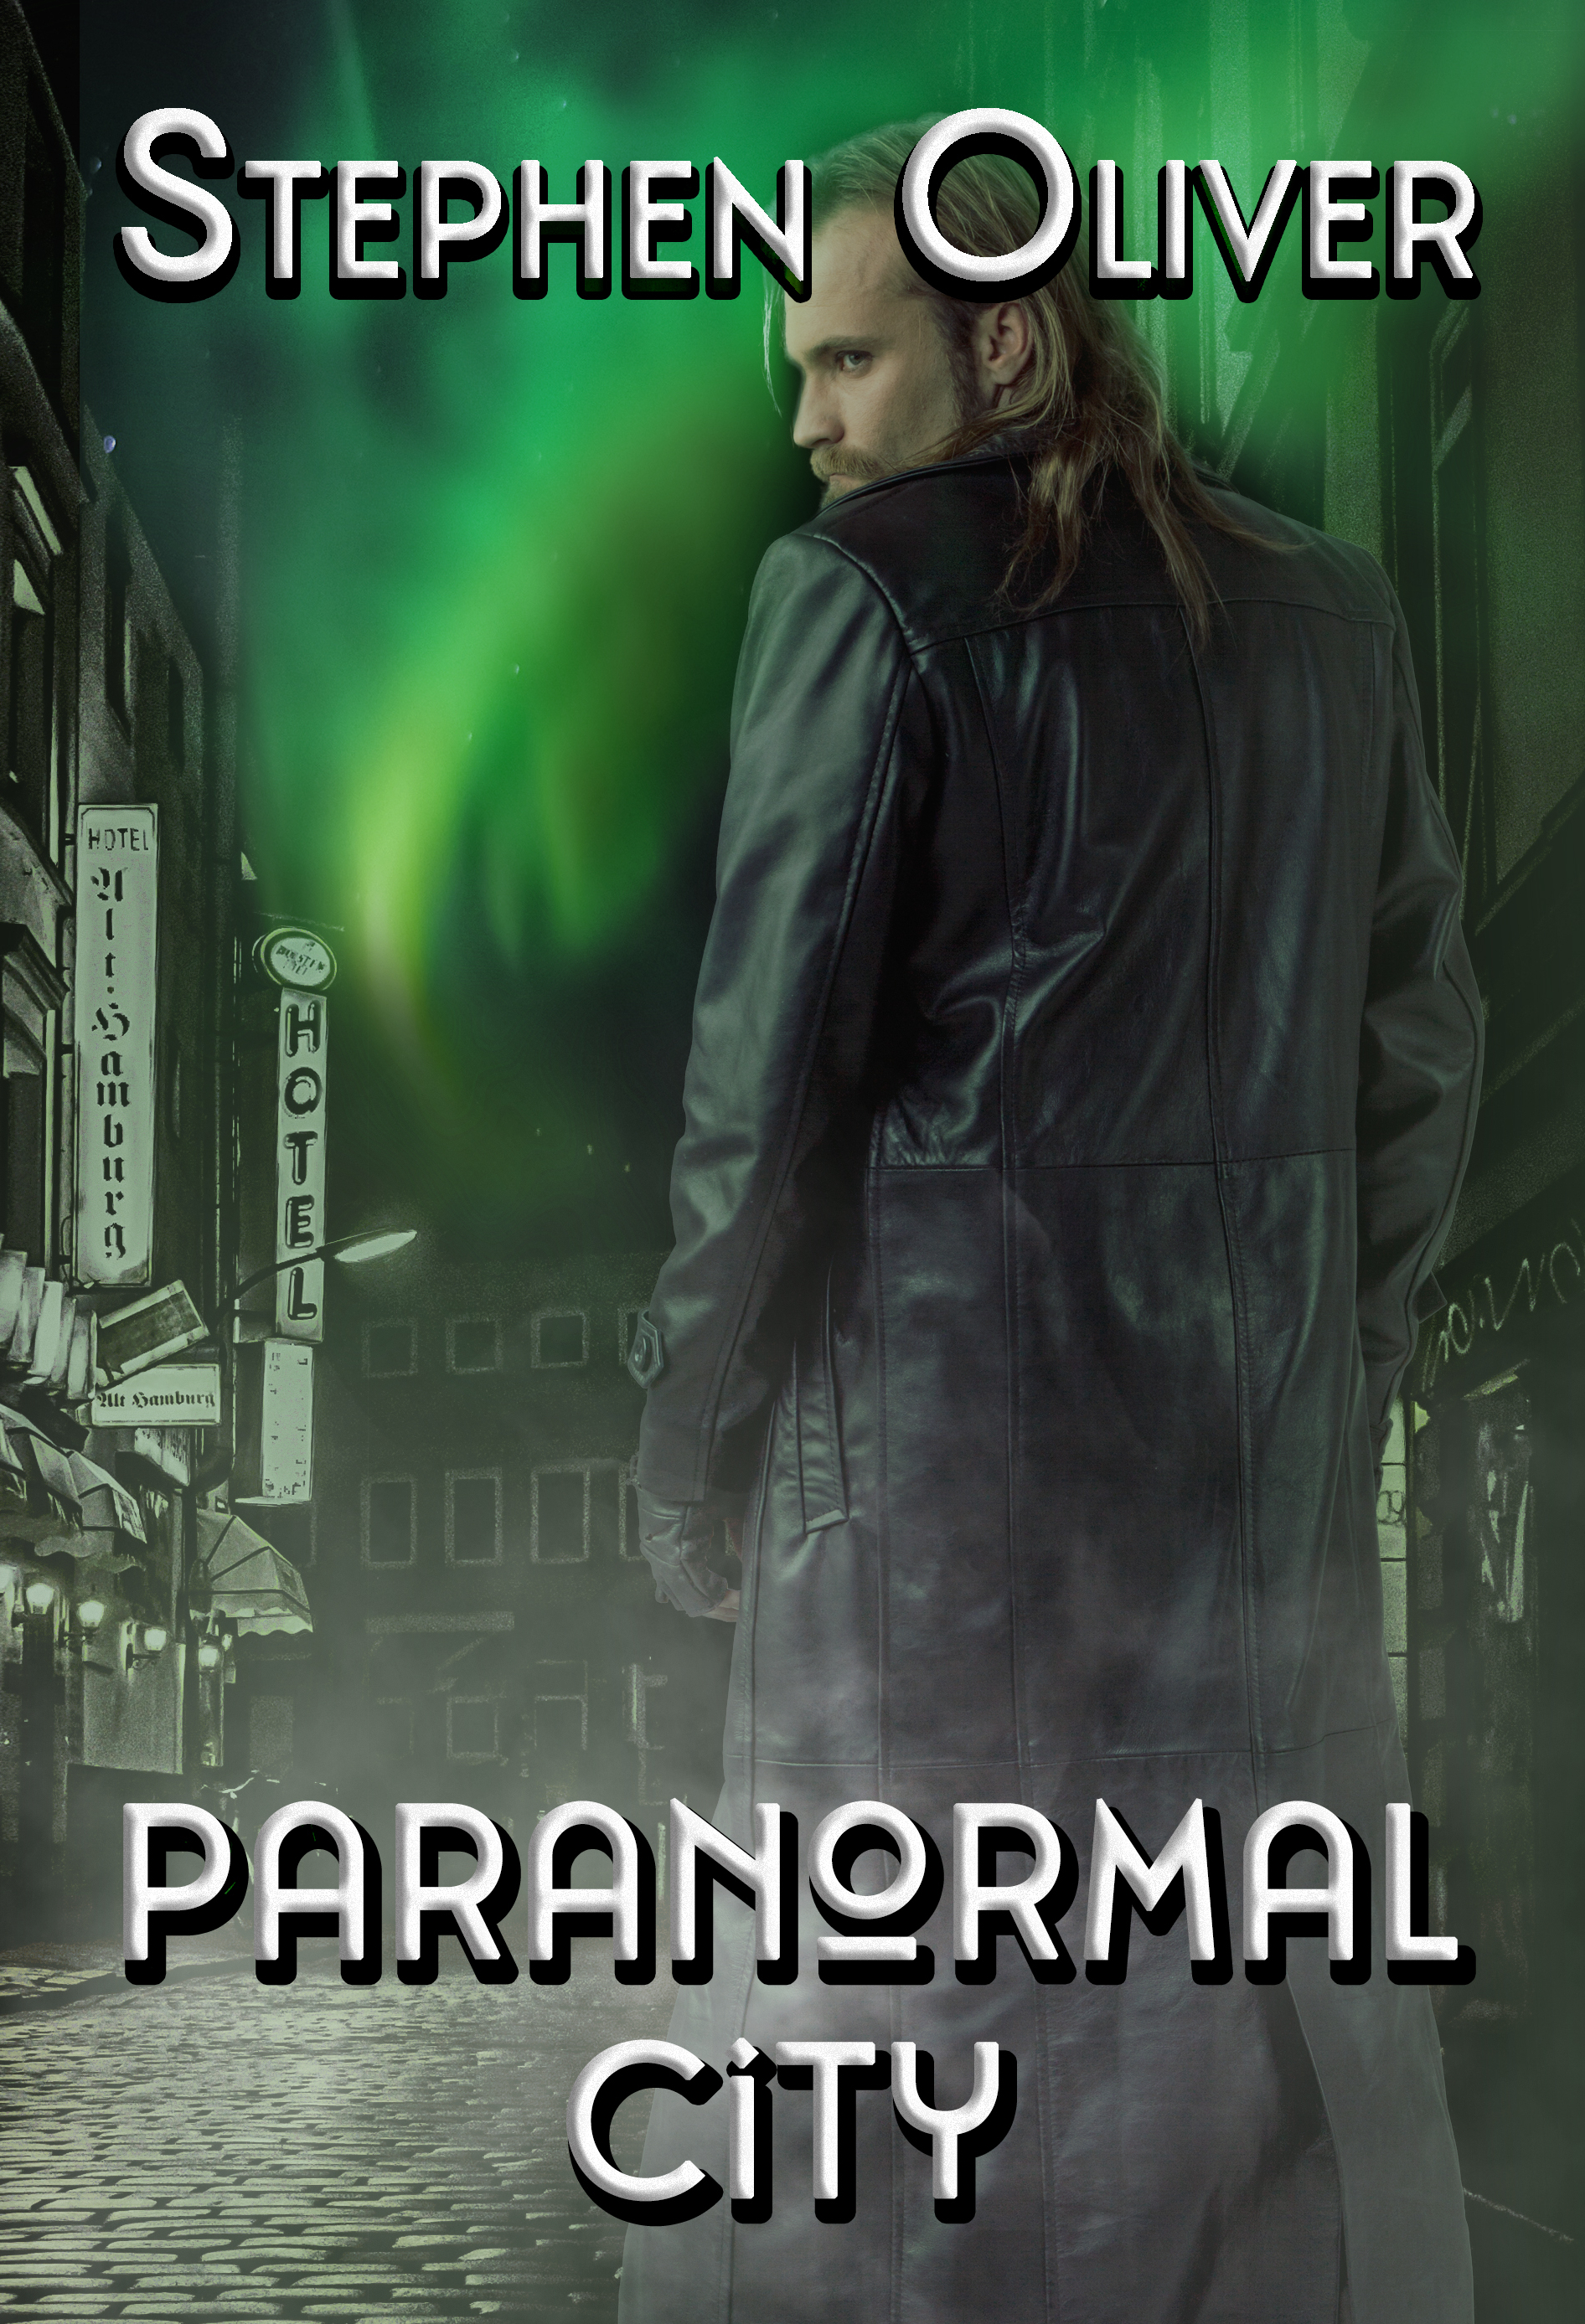 Release day is here! Paranormal City is now available on Kindle Unlimited!